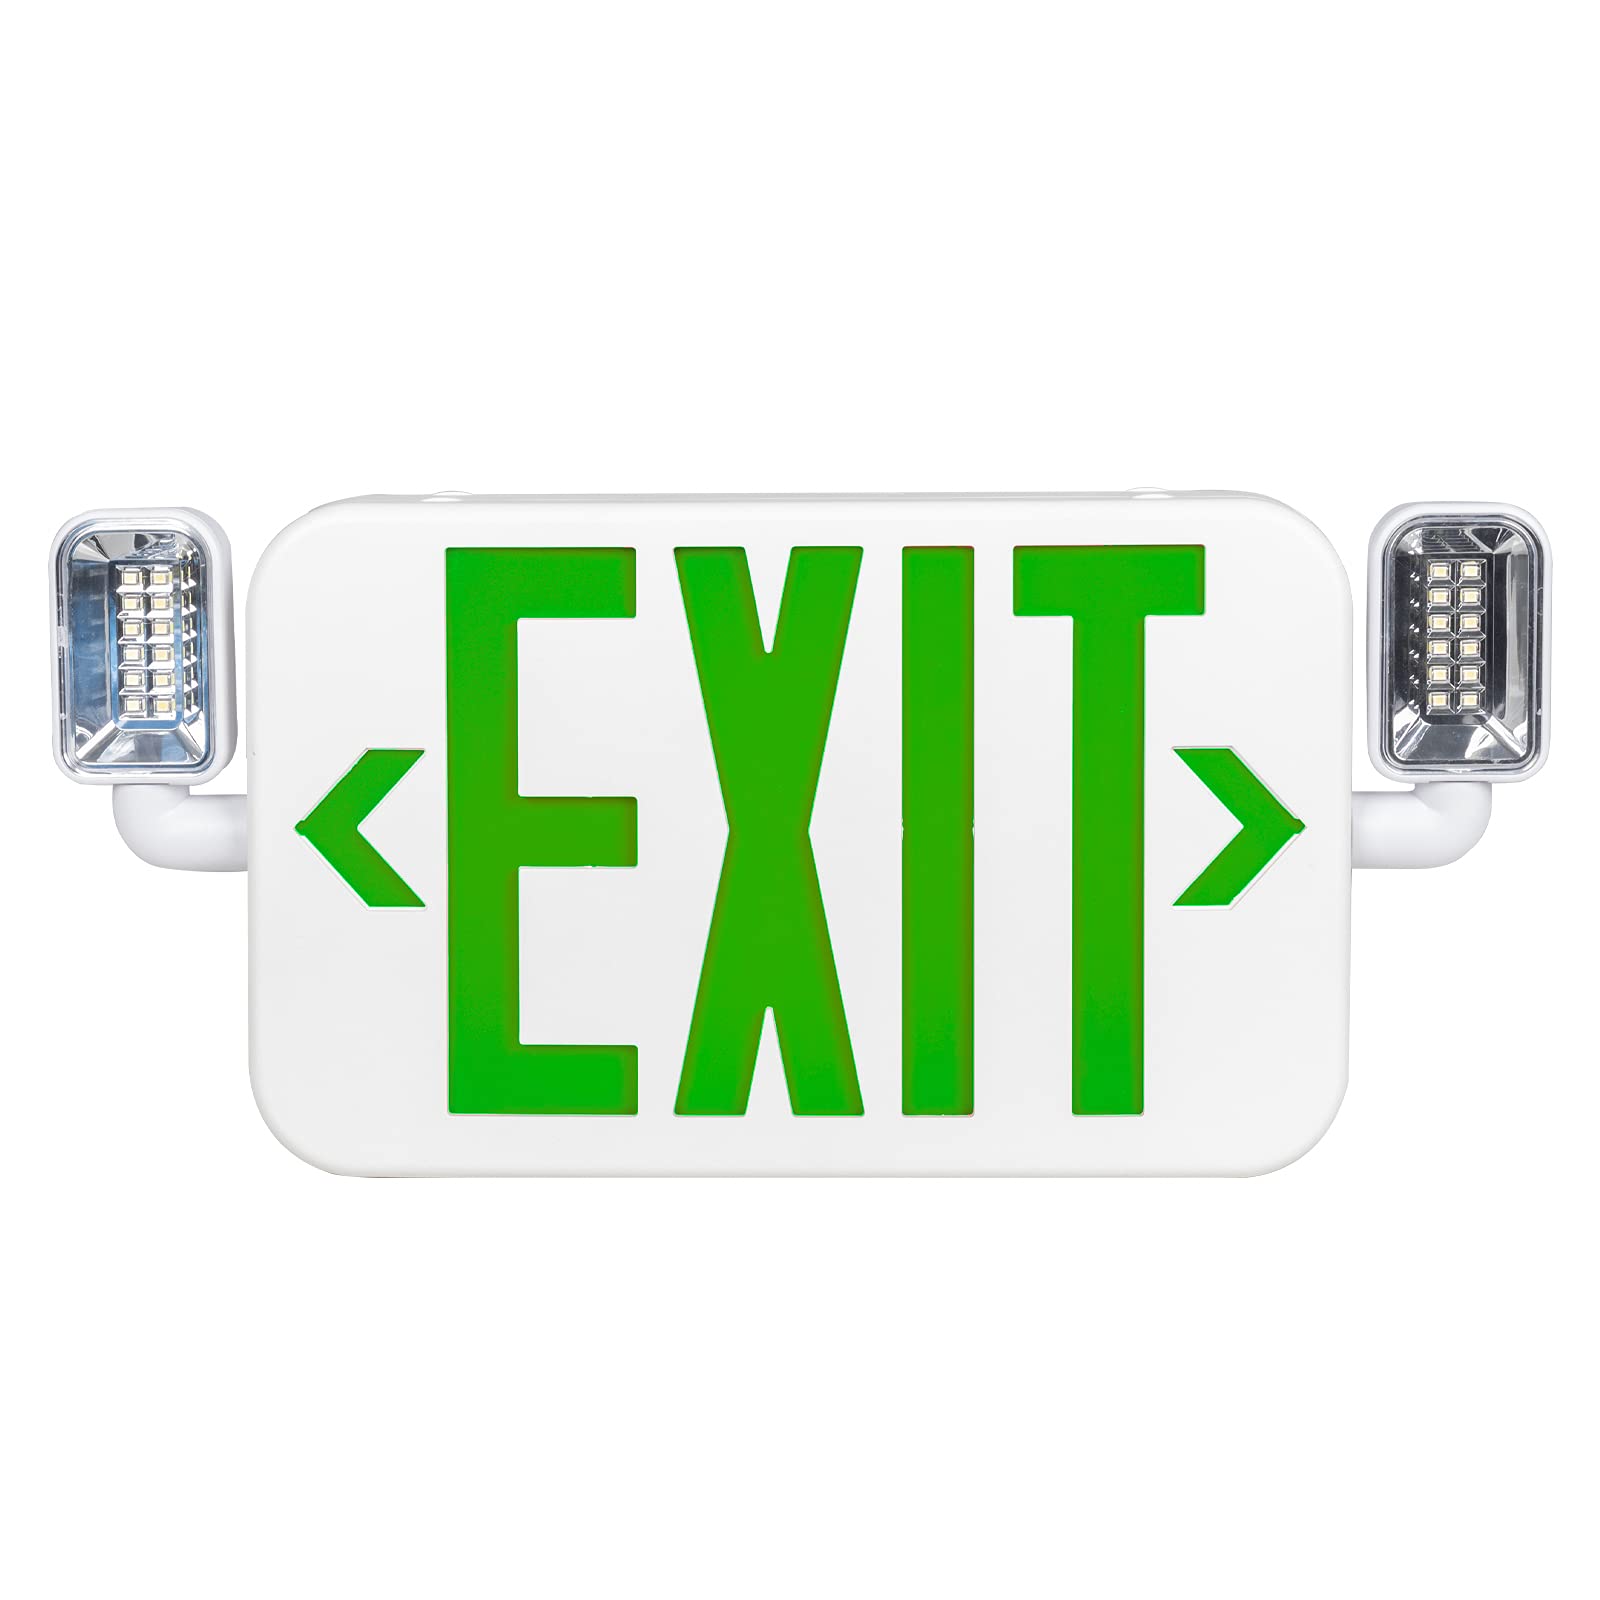 Ciata Ultra Slim Rechargeable Indoor Exit/Emergency Combo Sign Fixture with Battery powered Backup  - Like New